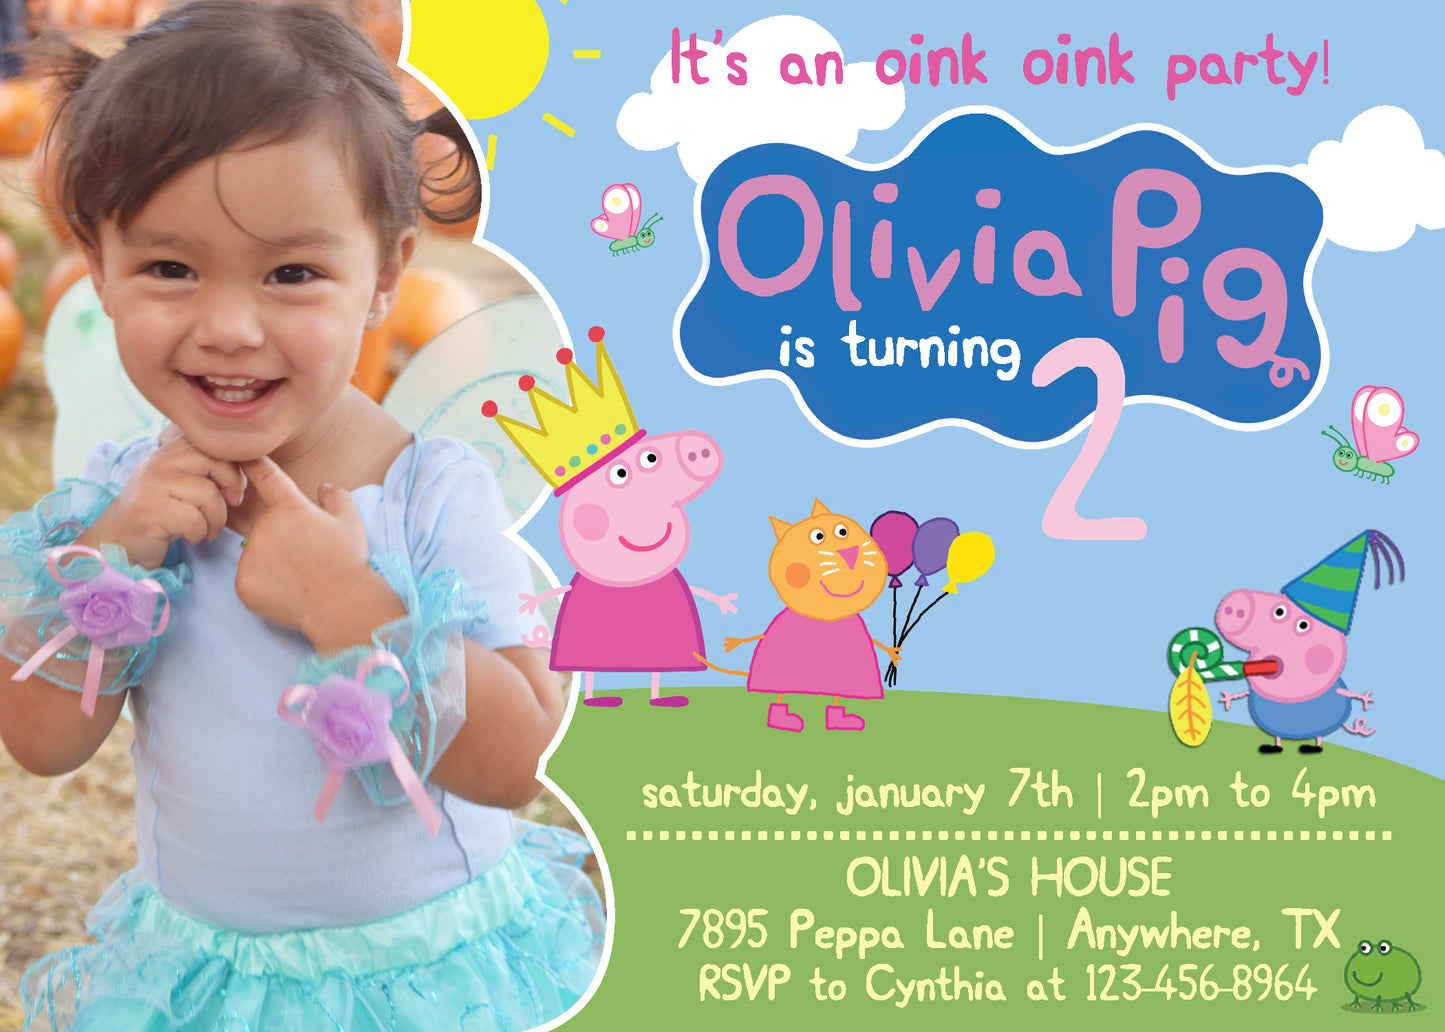 Adorable PEPPA PIG Printed or Digital Birthday Party Invitation! Peppa and Friends!